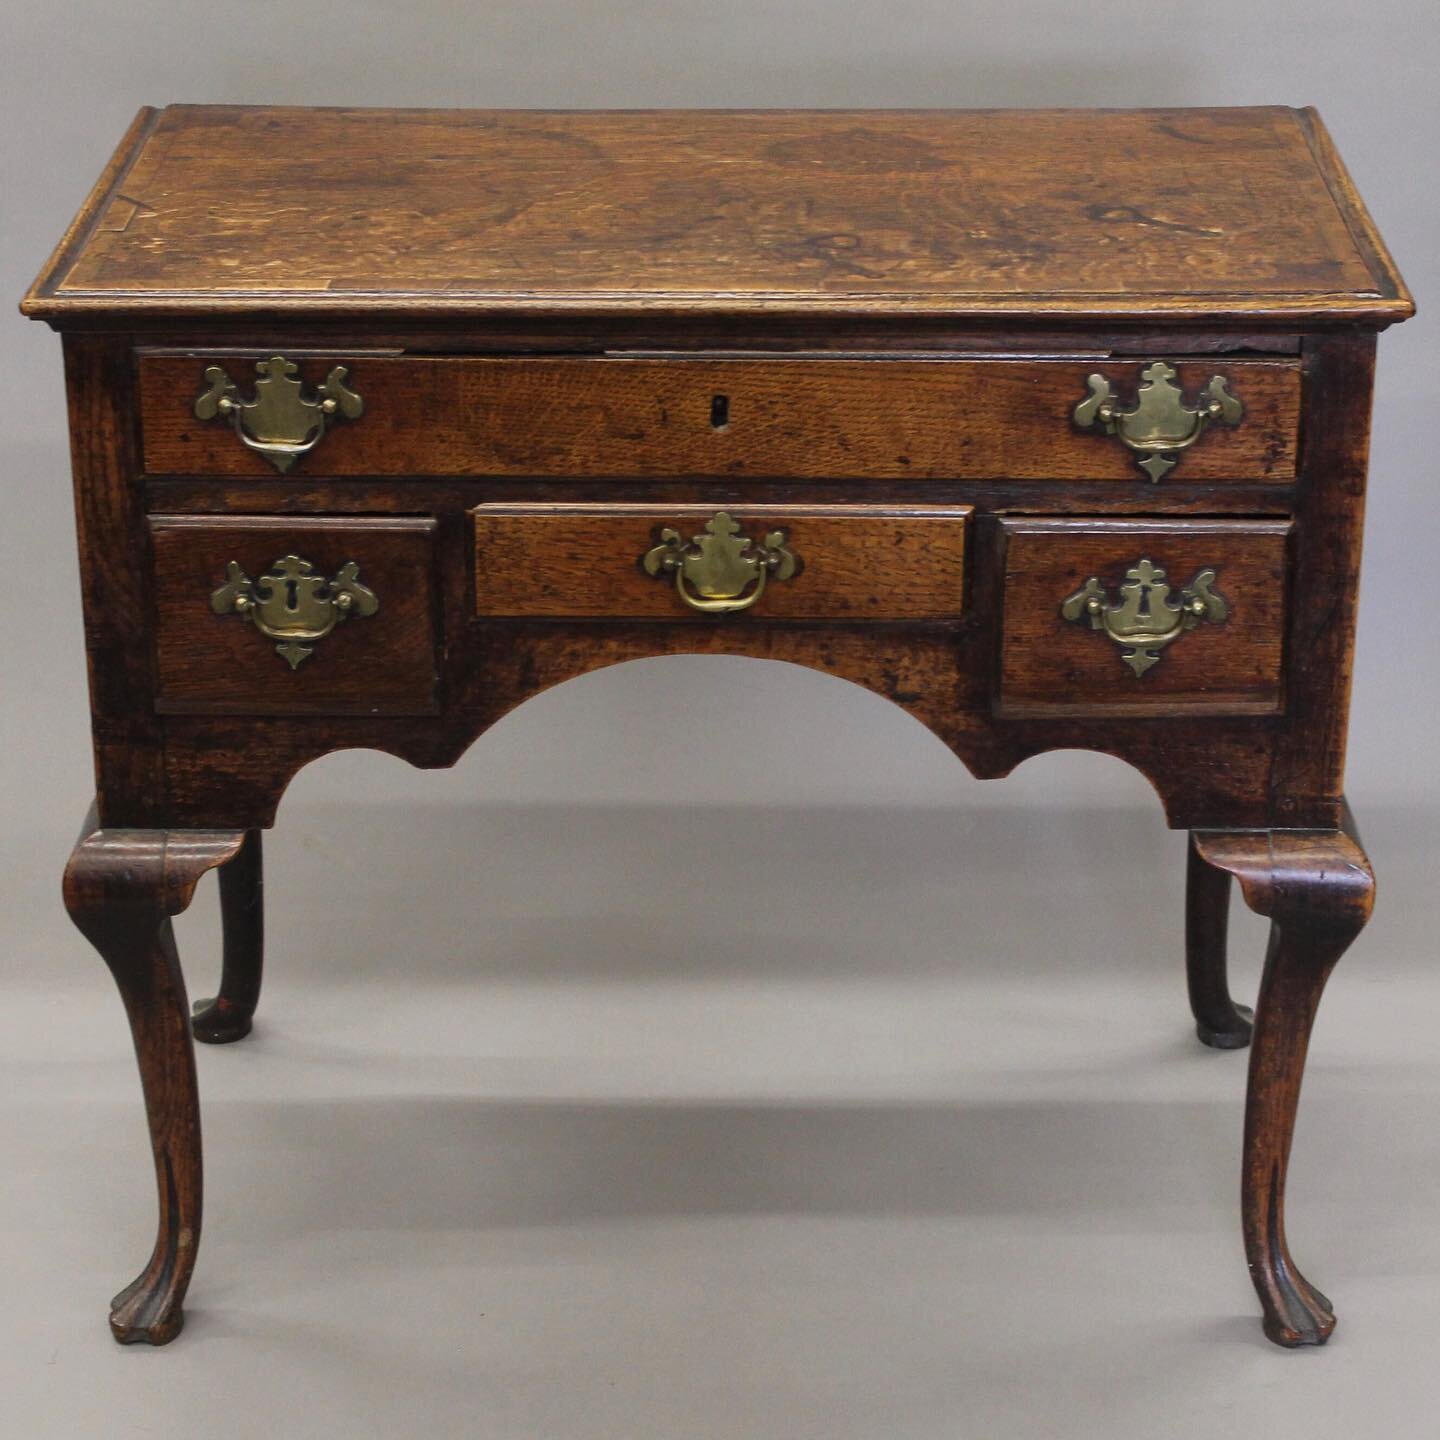 CATALOGUE NOW ONLINE LIVE BIDDING AVAILABLE Lot 876 An 18th century oak low boy to be included in our 3rd July 2021 Antiques Interiors and Collectables auction to be held at 8 Downham Road Ely Cambridgeshire CB6 1AH #auction #sale #auctionhouse #auct